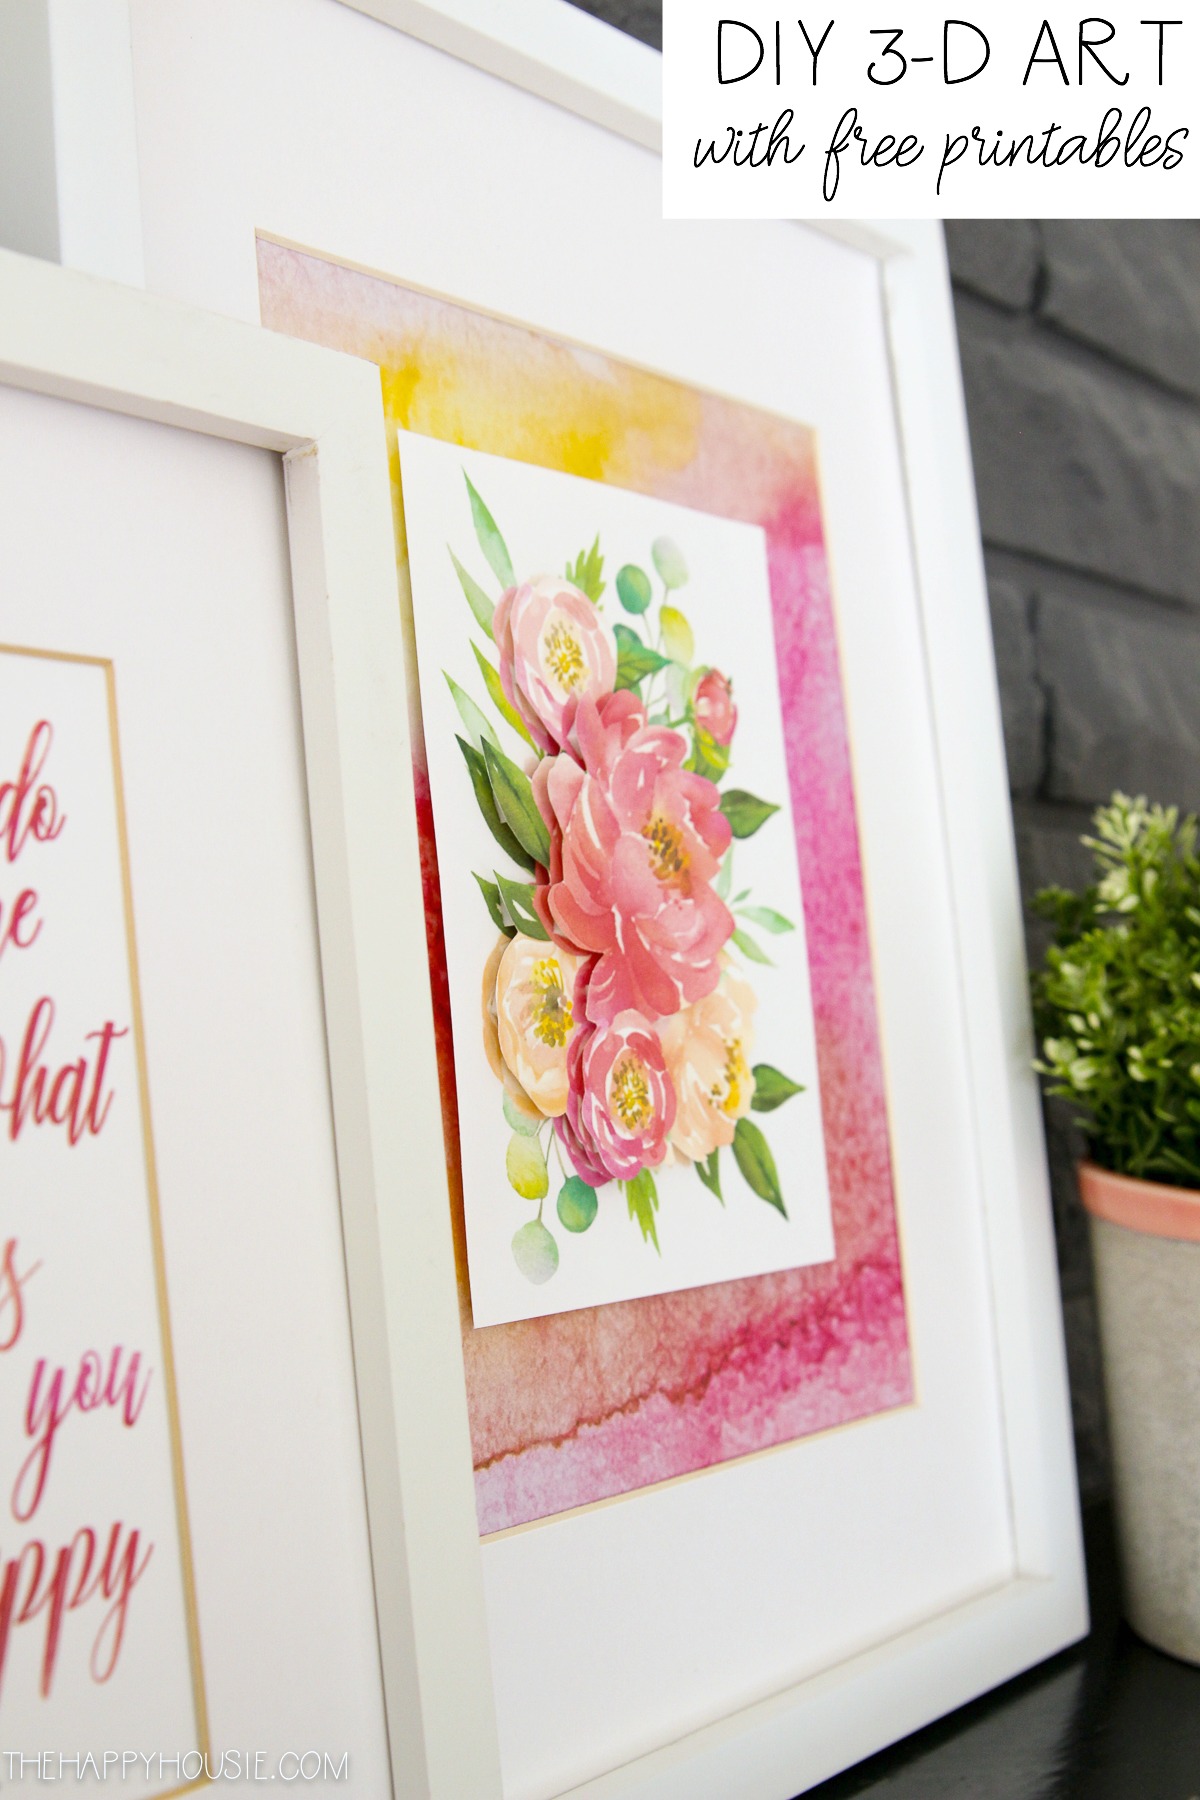 DIY 3-D Art With Free Printables poster.